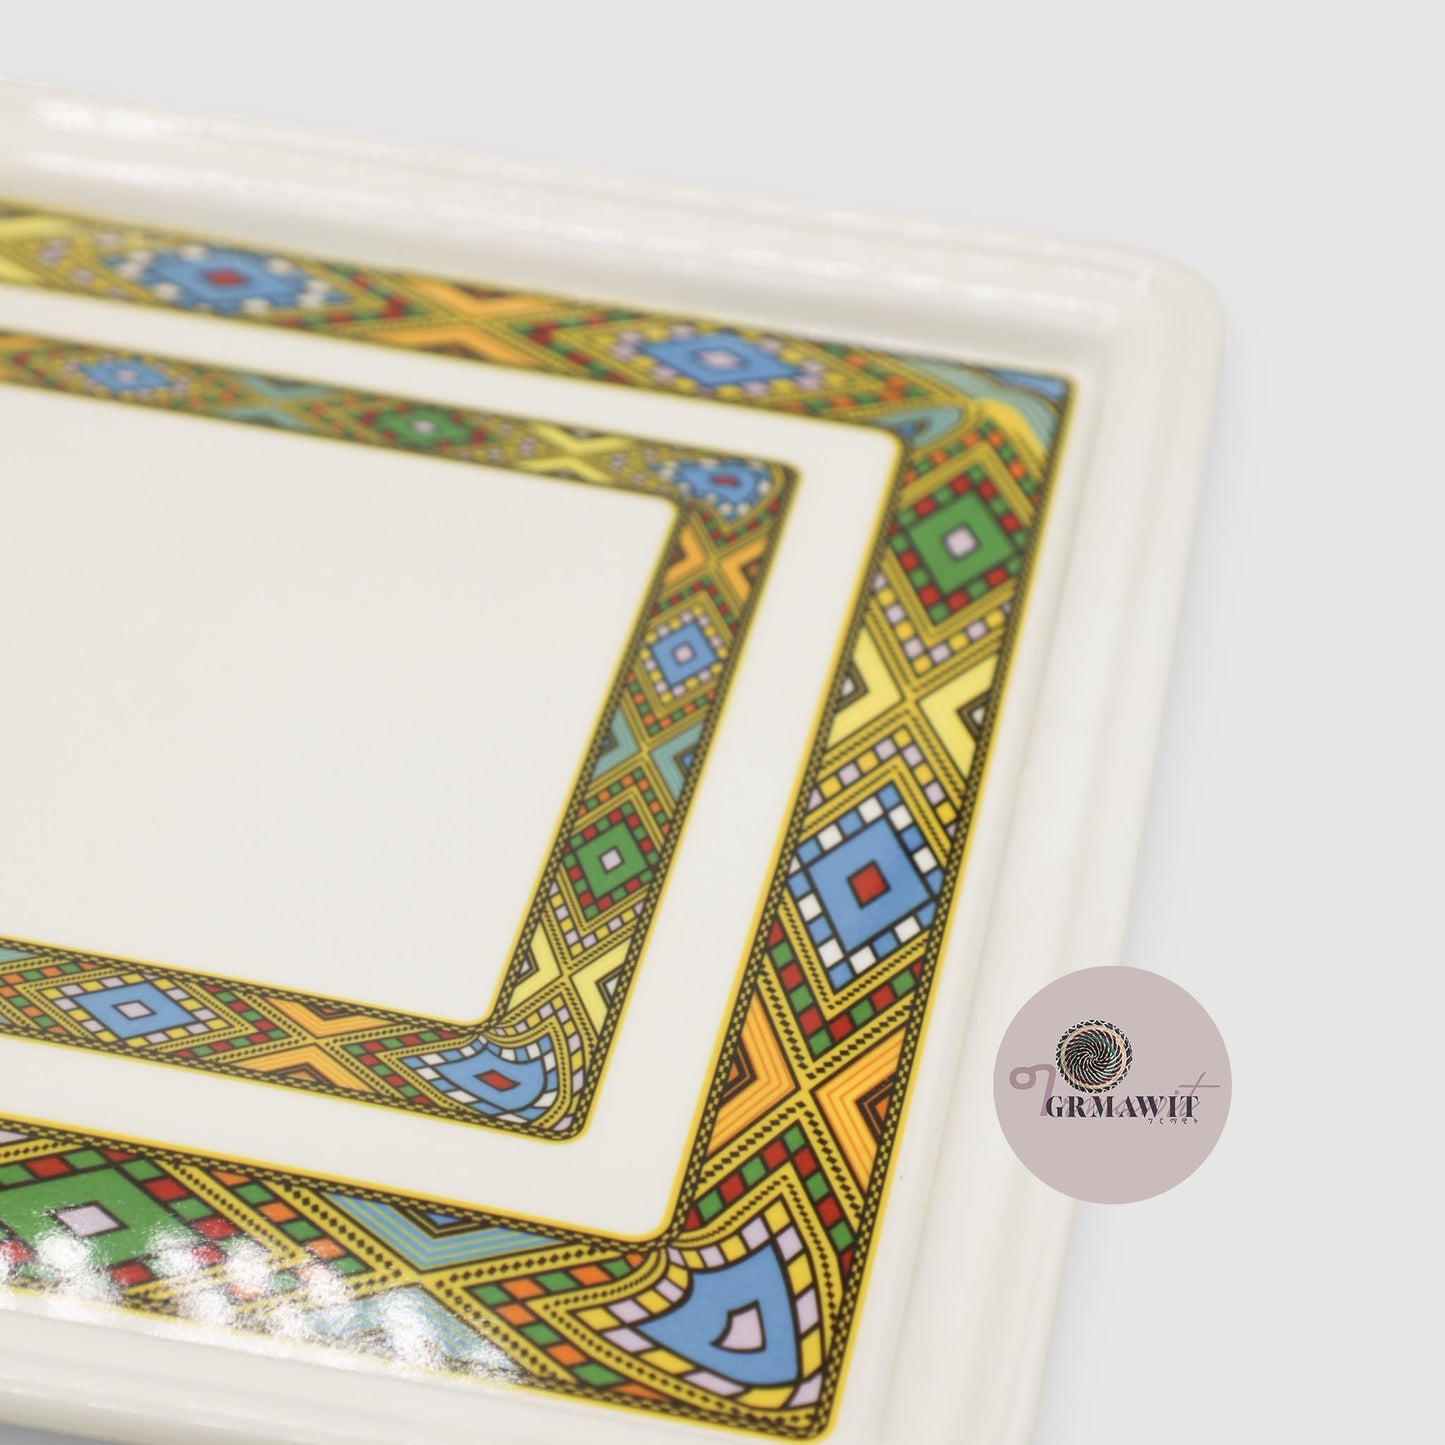 Traditional Ethiopian / Eritrean Serving Tray Grmawit 